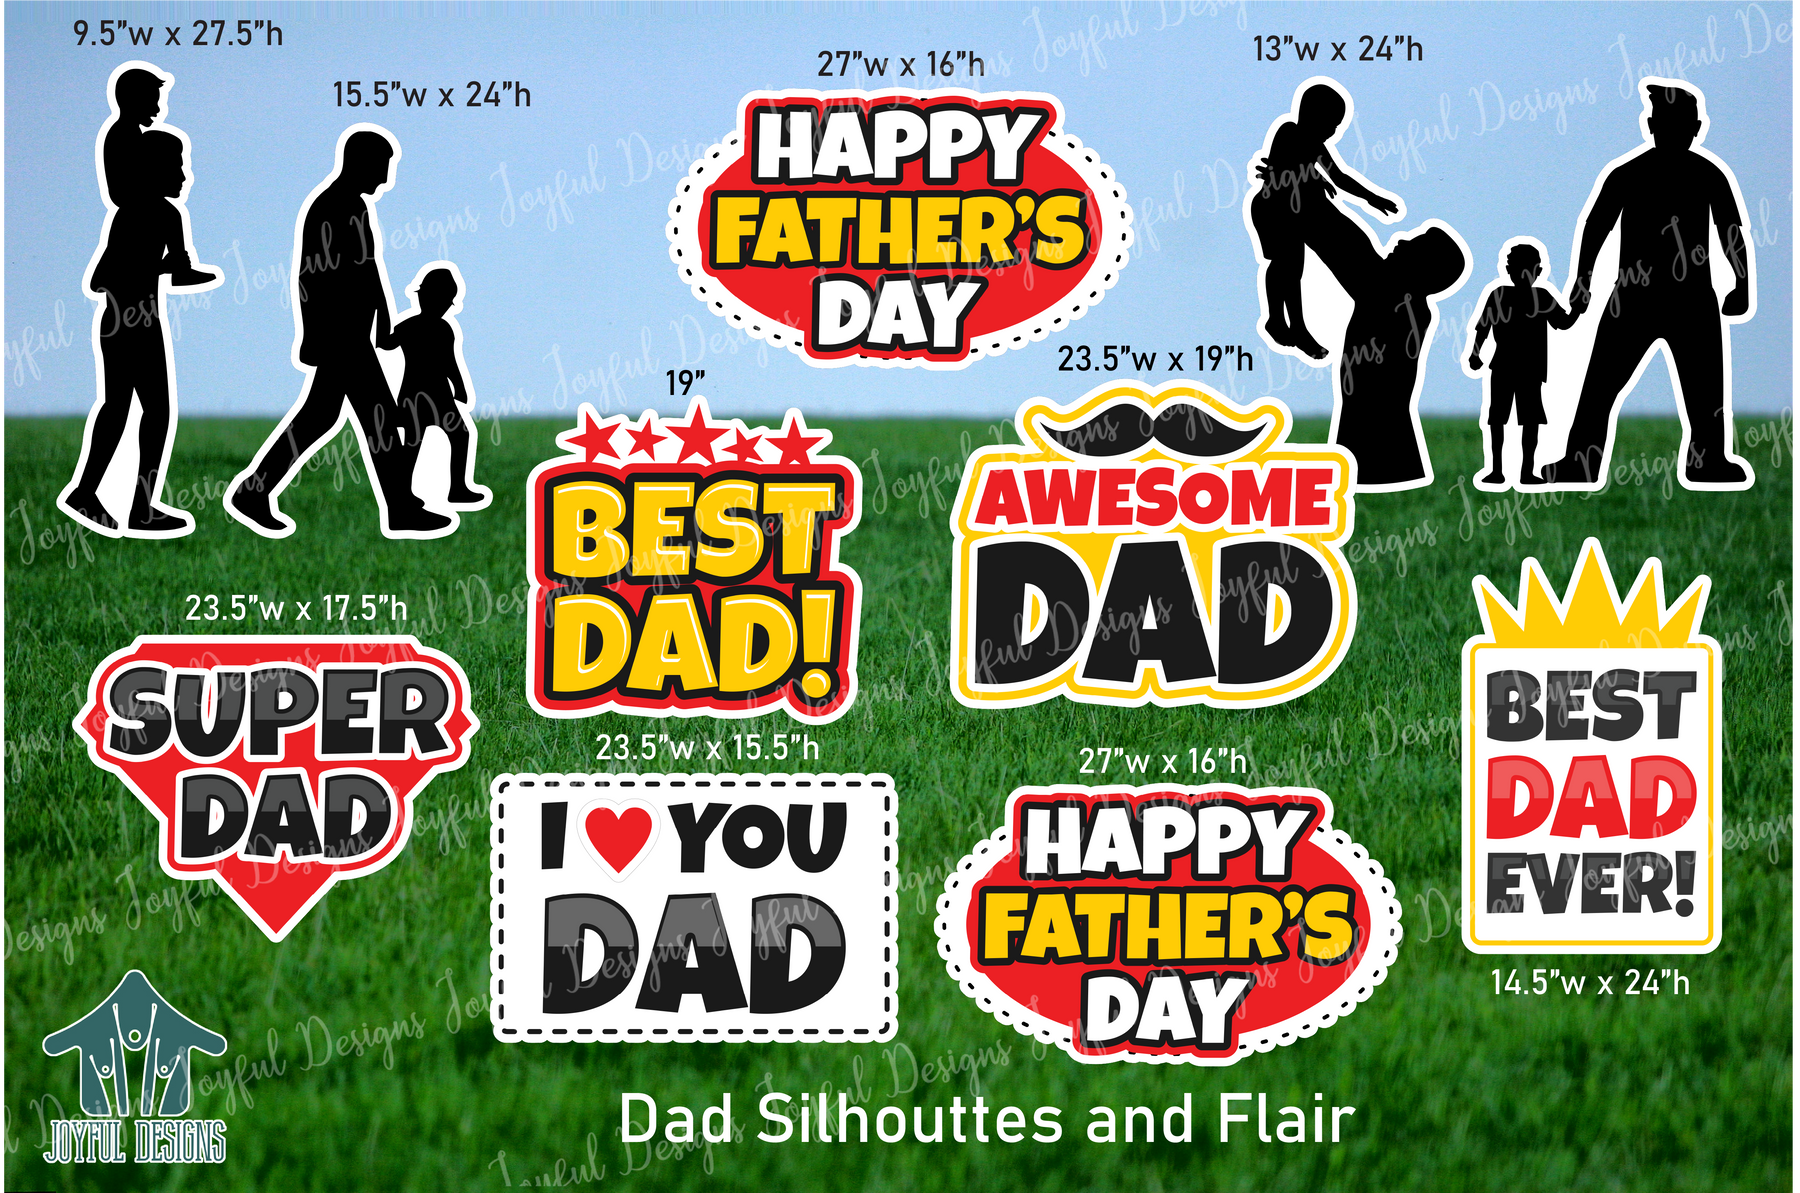 Father's Day & Dad Silhouettes & Flair